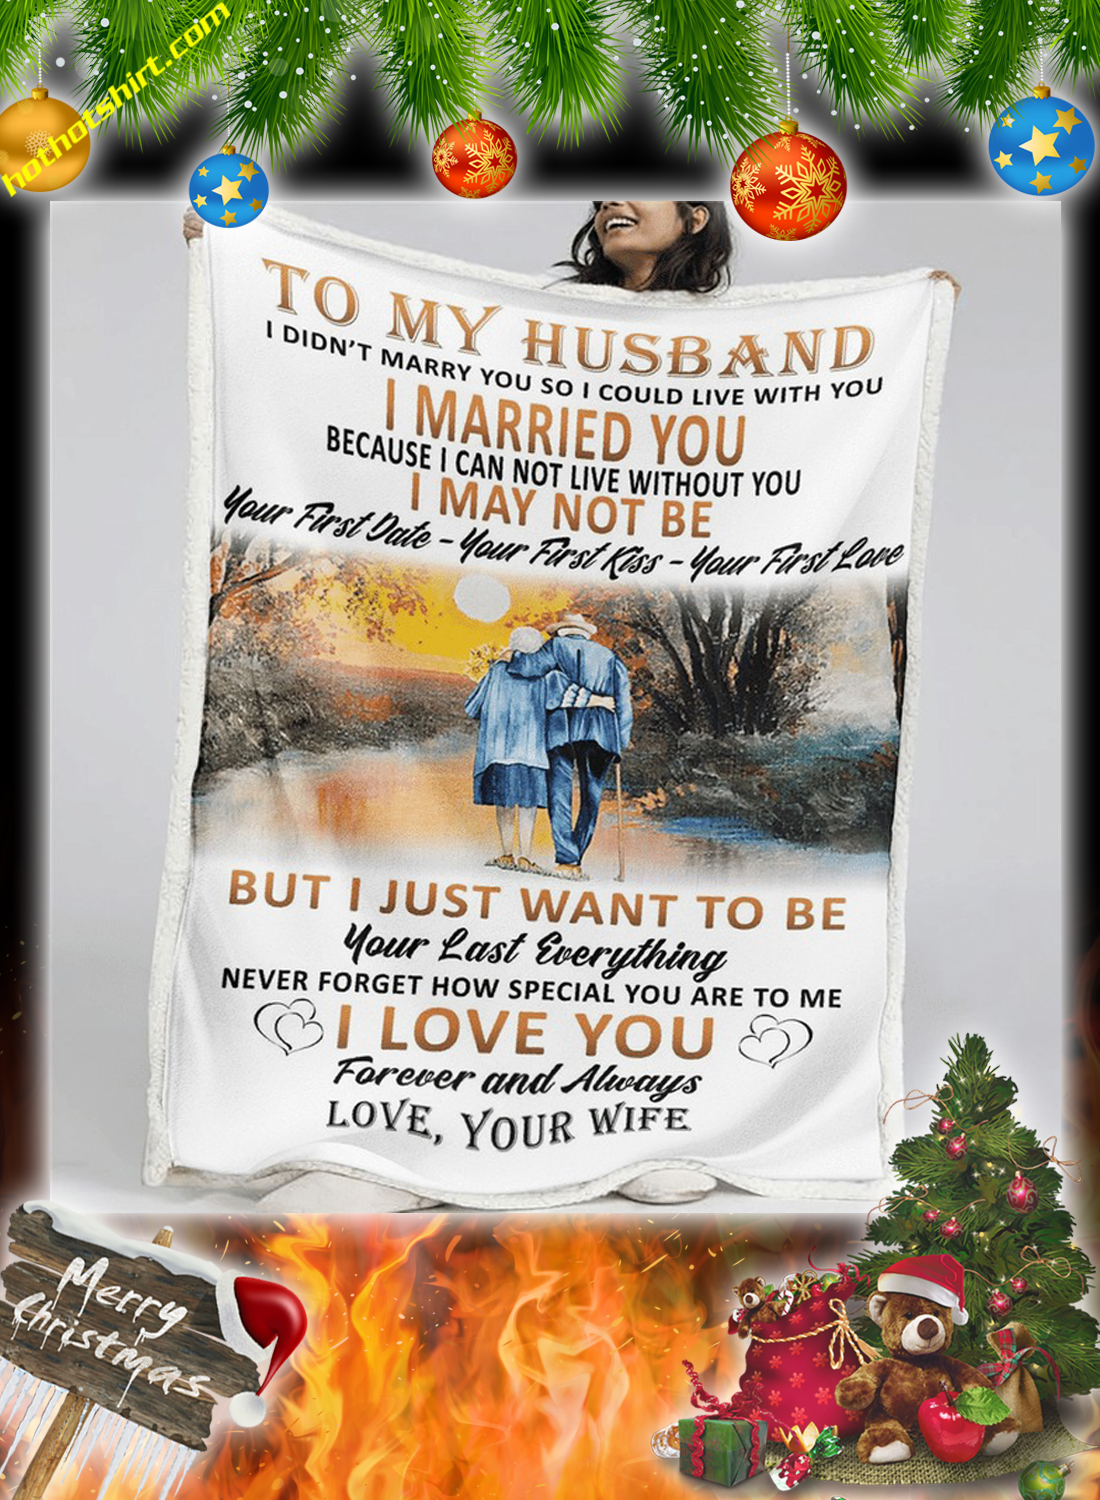 To my husband i didn't marry you so i could live with you your wife quilt 2